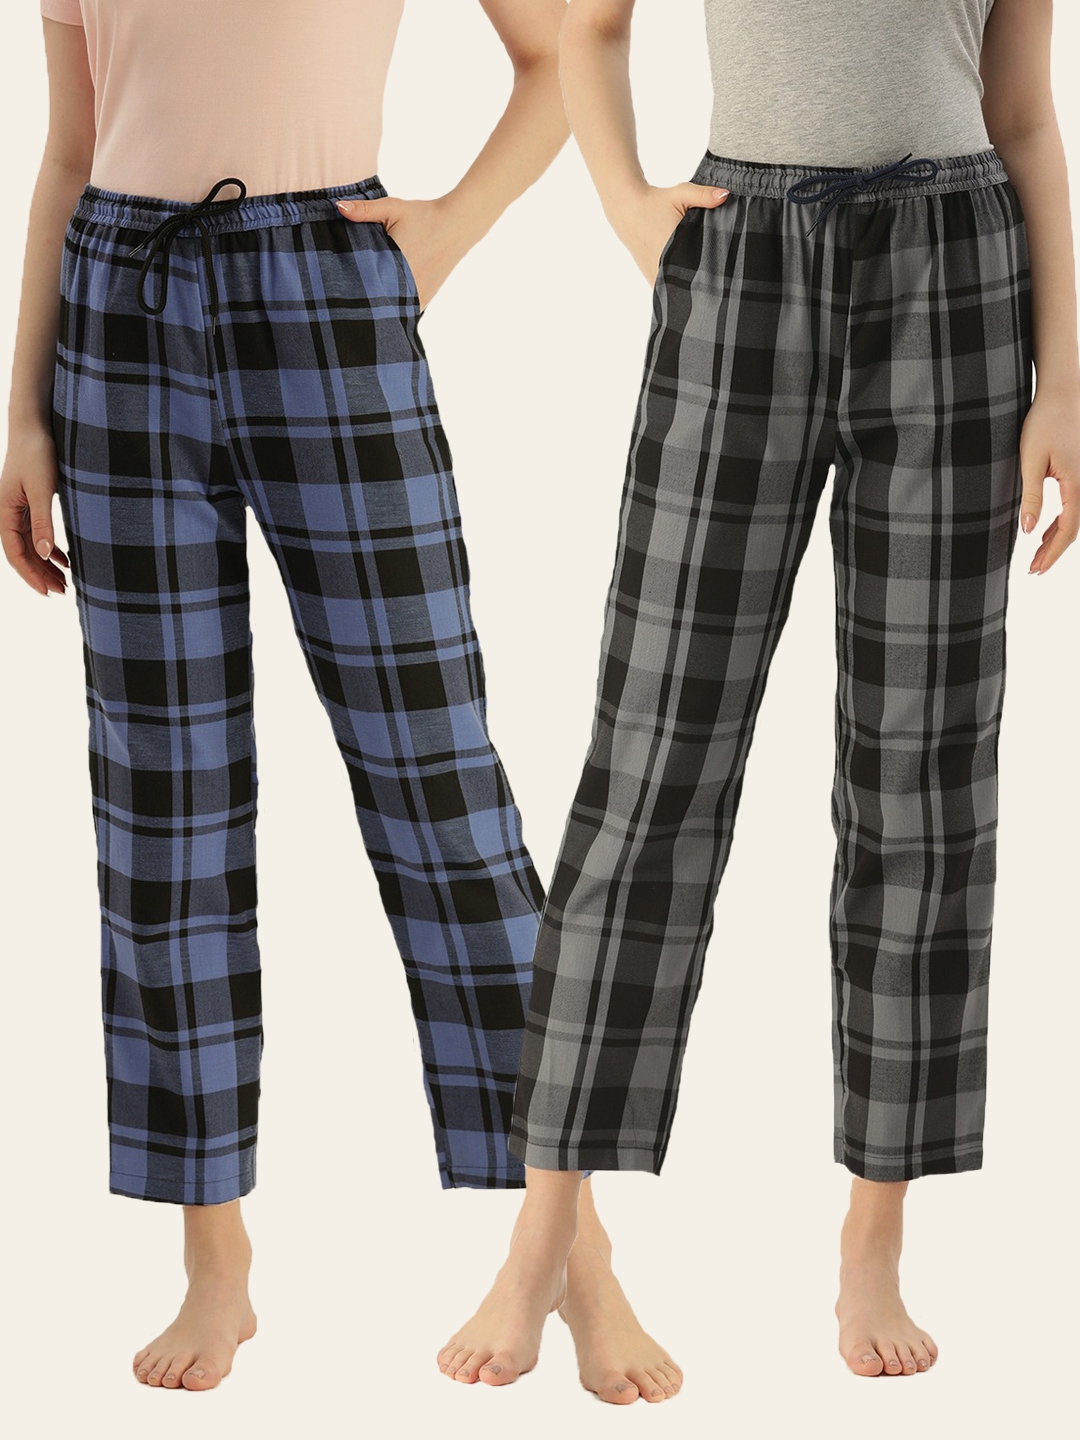 Kryptic | Kryptic Womens 100% Cotton Checked Printed Full Length Lounge Pants - Pack of 2